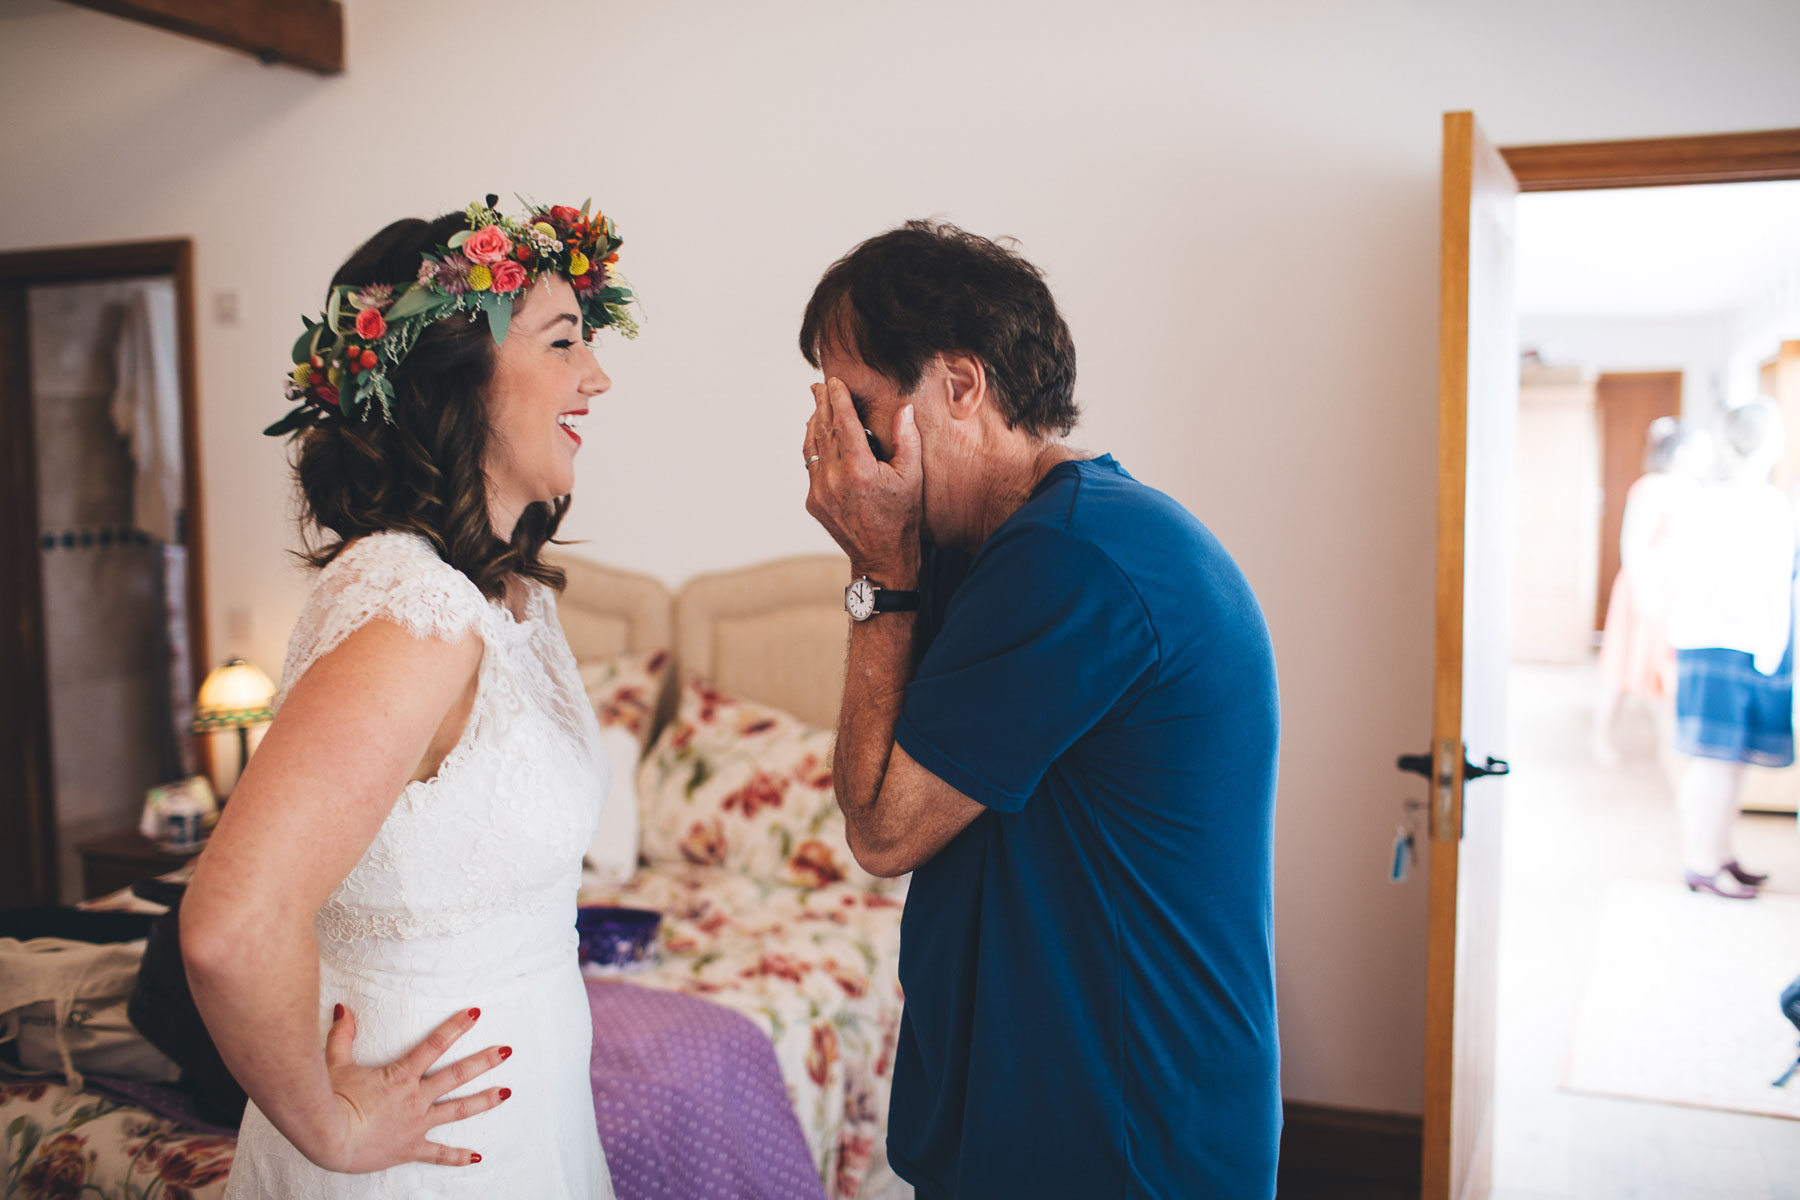 Dad covers his face in exasperation at seeing his daughter ready for her wedding